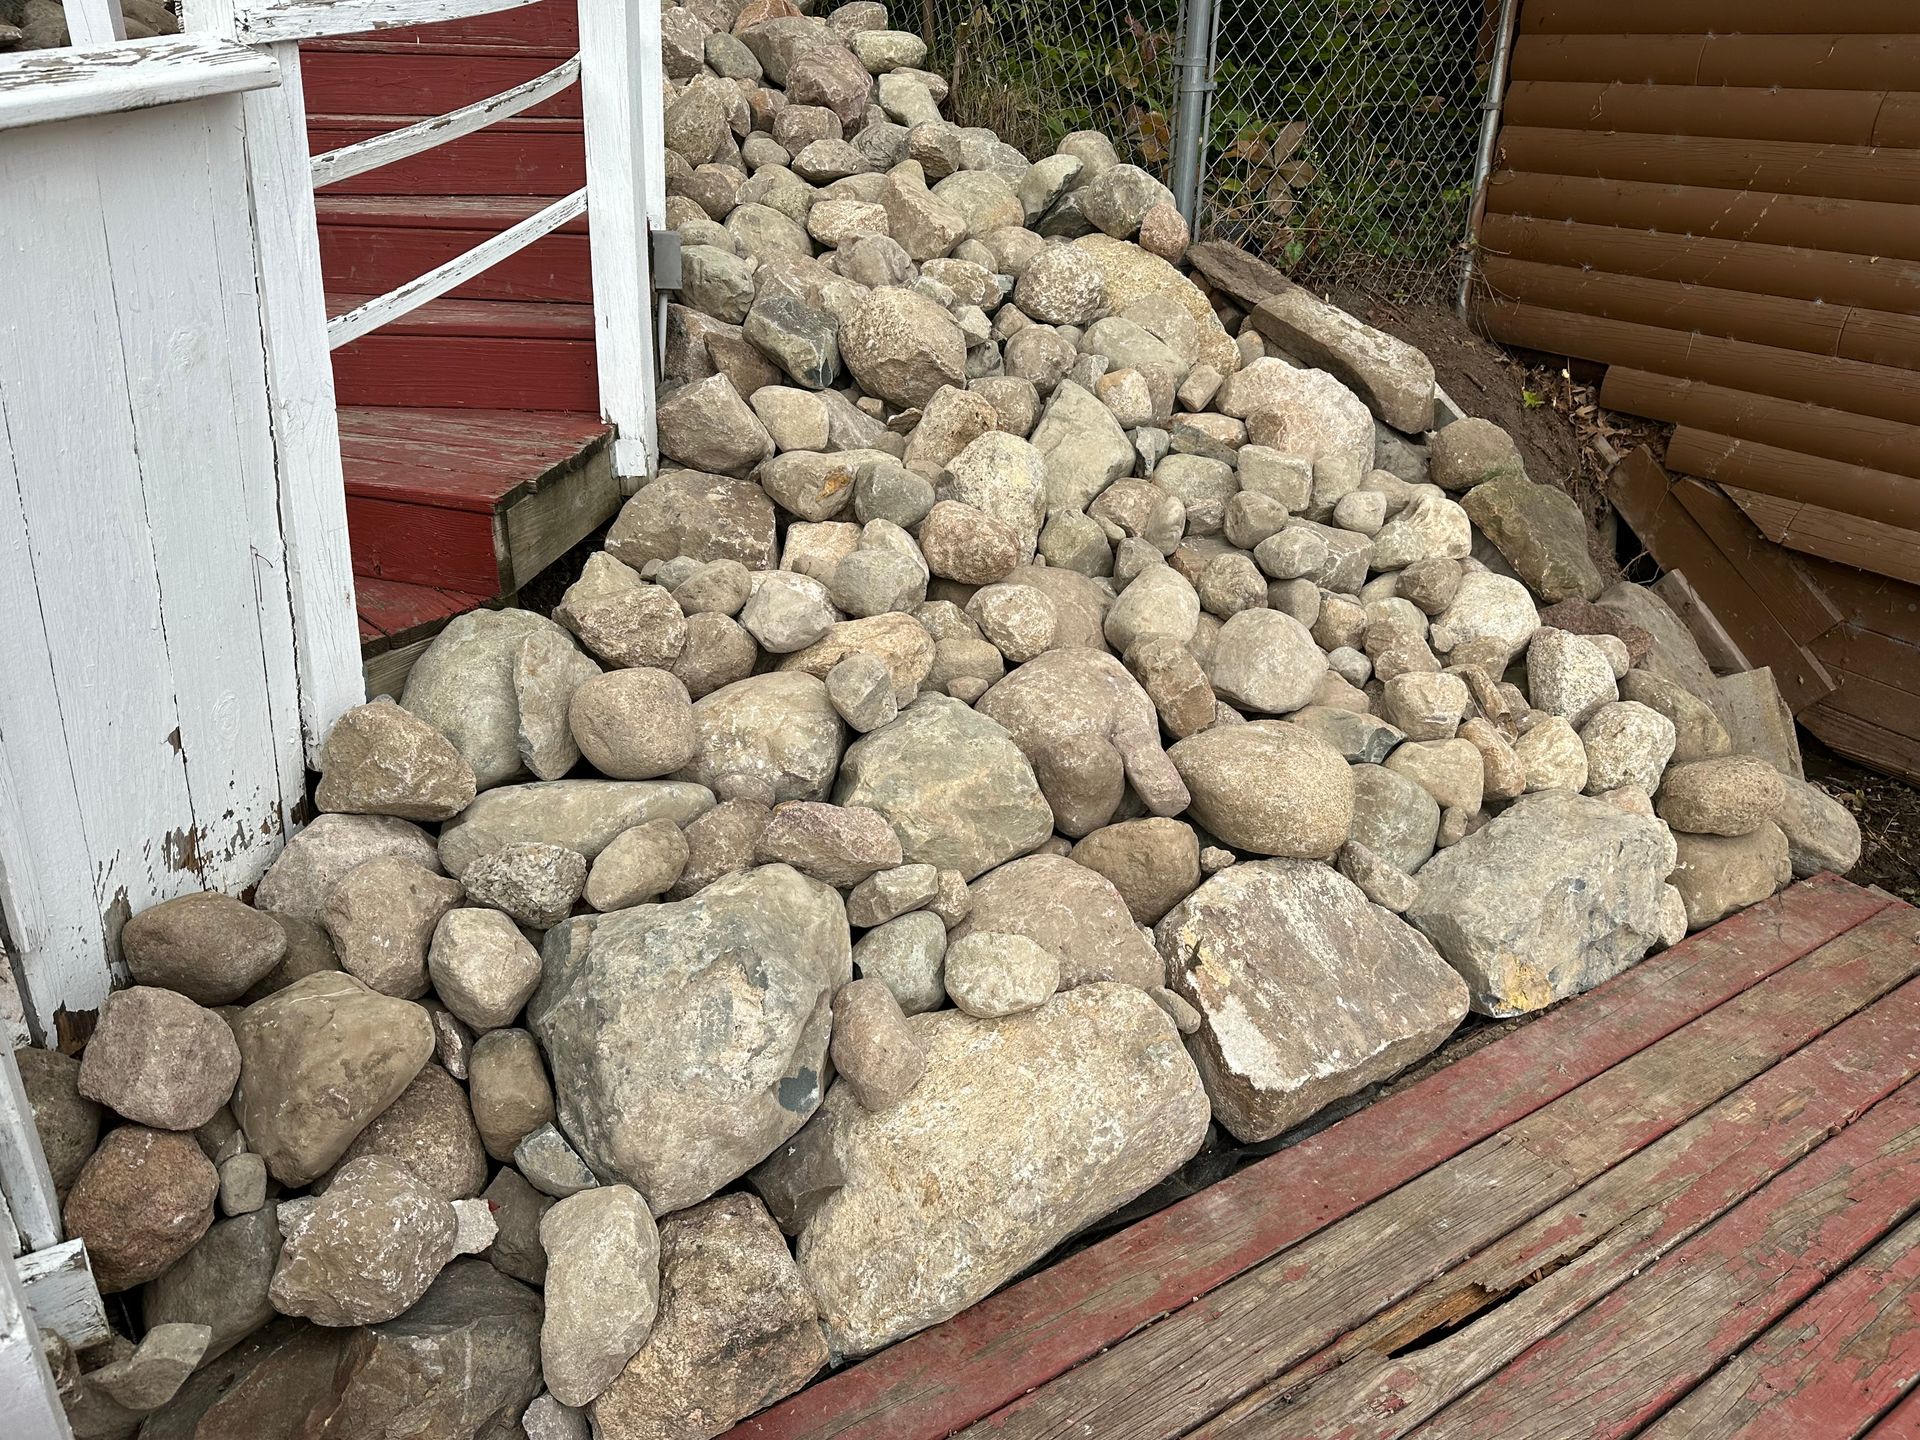 a pile of rocks sitting on top of a wooden deck next to stairs .